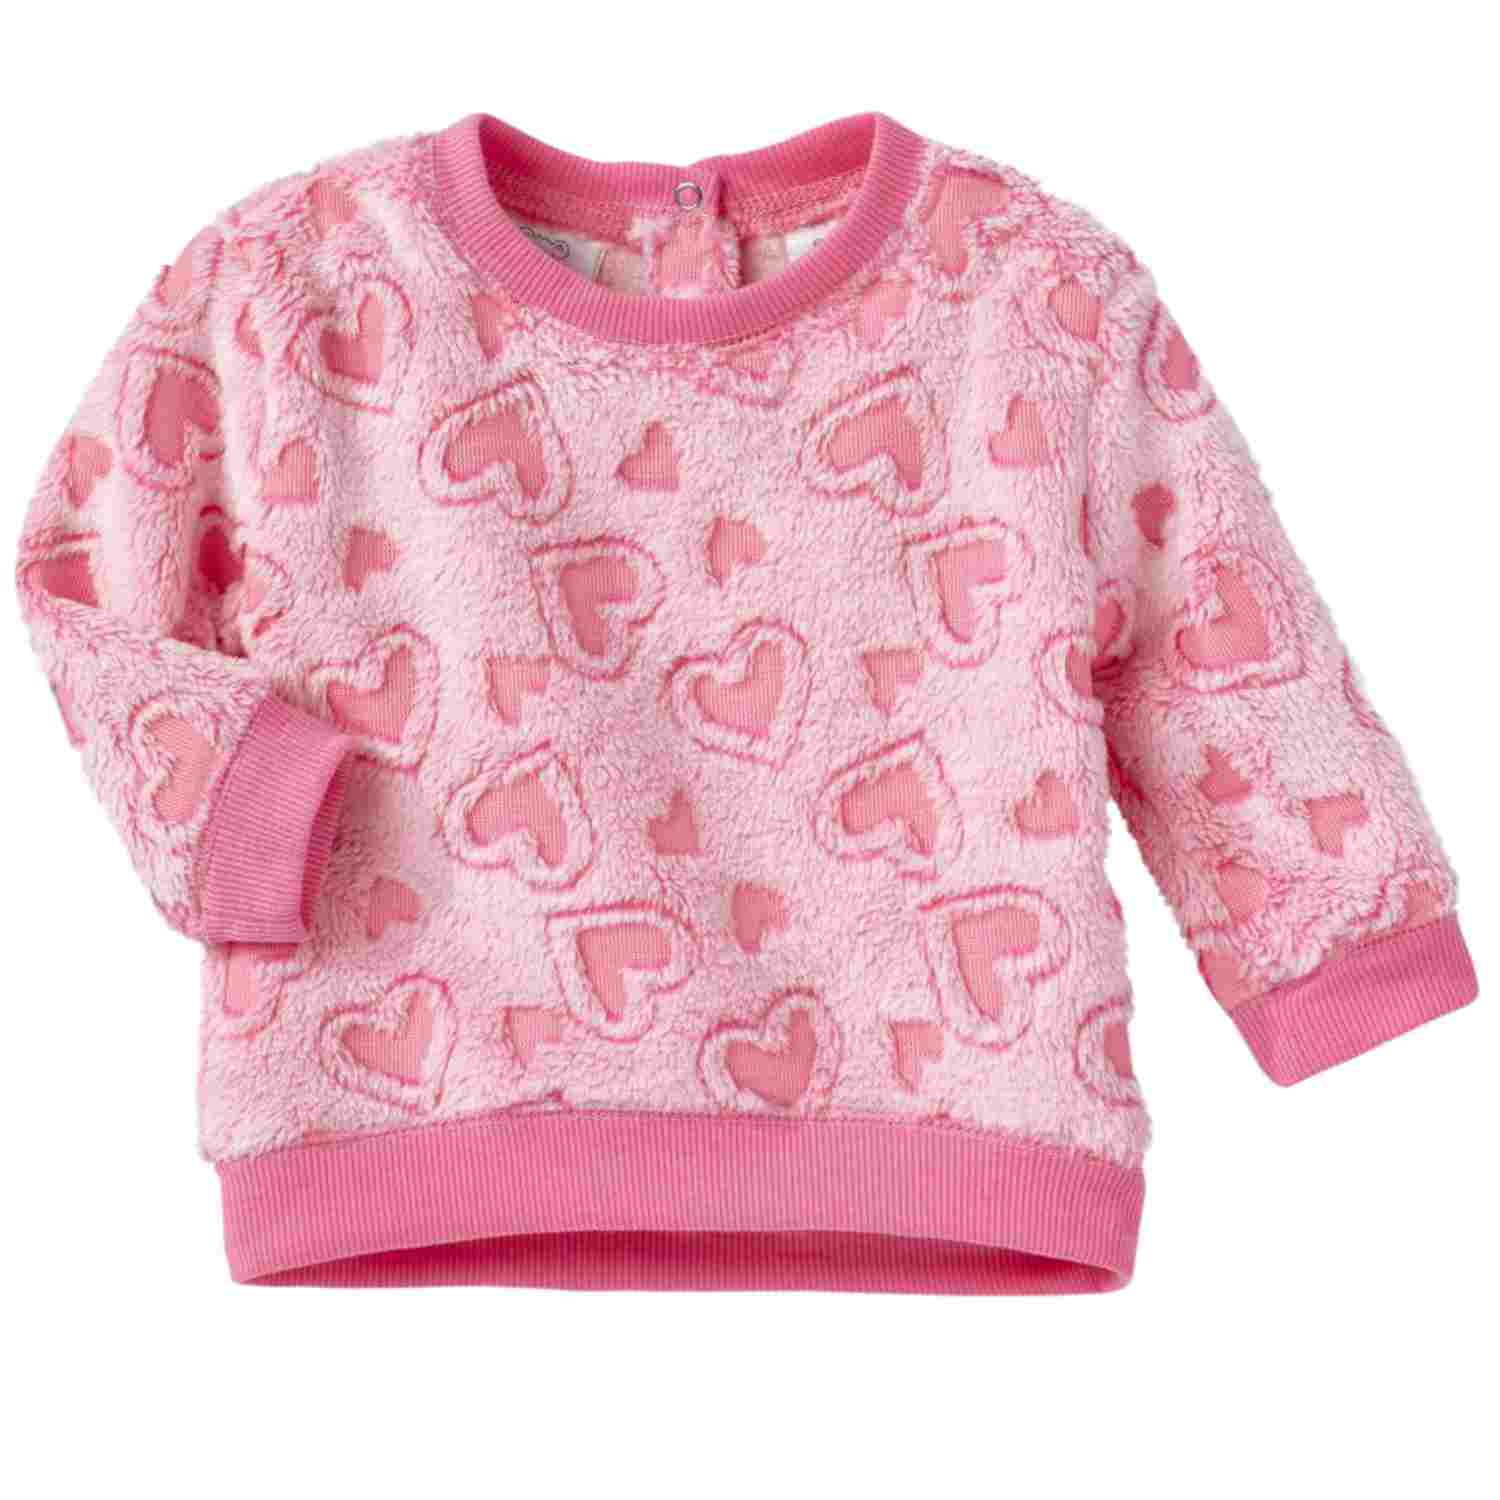 Details about   SWIGGLES INFANT GIRLS 2PC SET SIZE 0-3MONTHS FLEECE FAUX FUR PINK WHITE NWT 